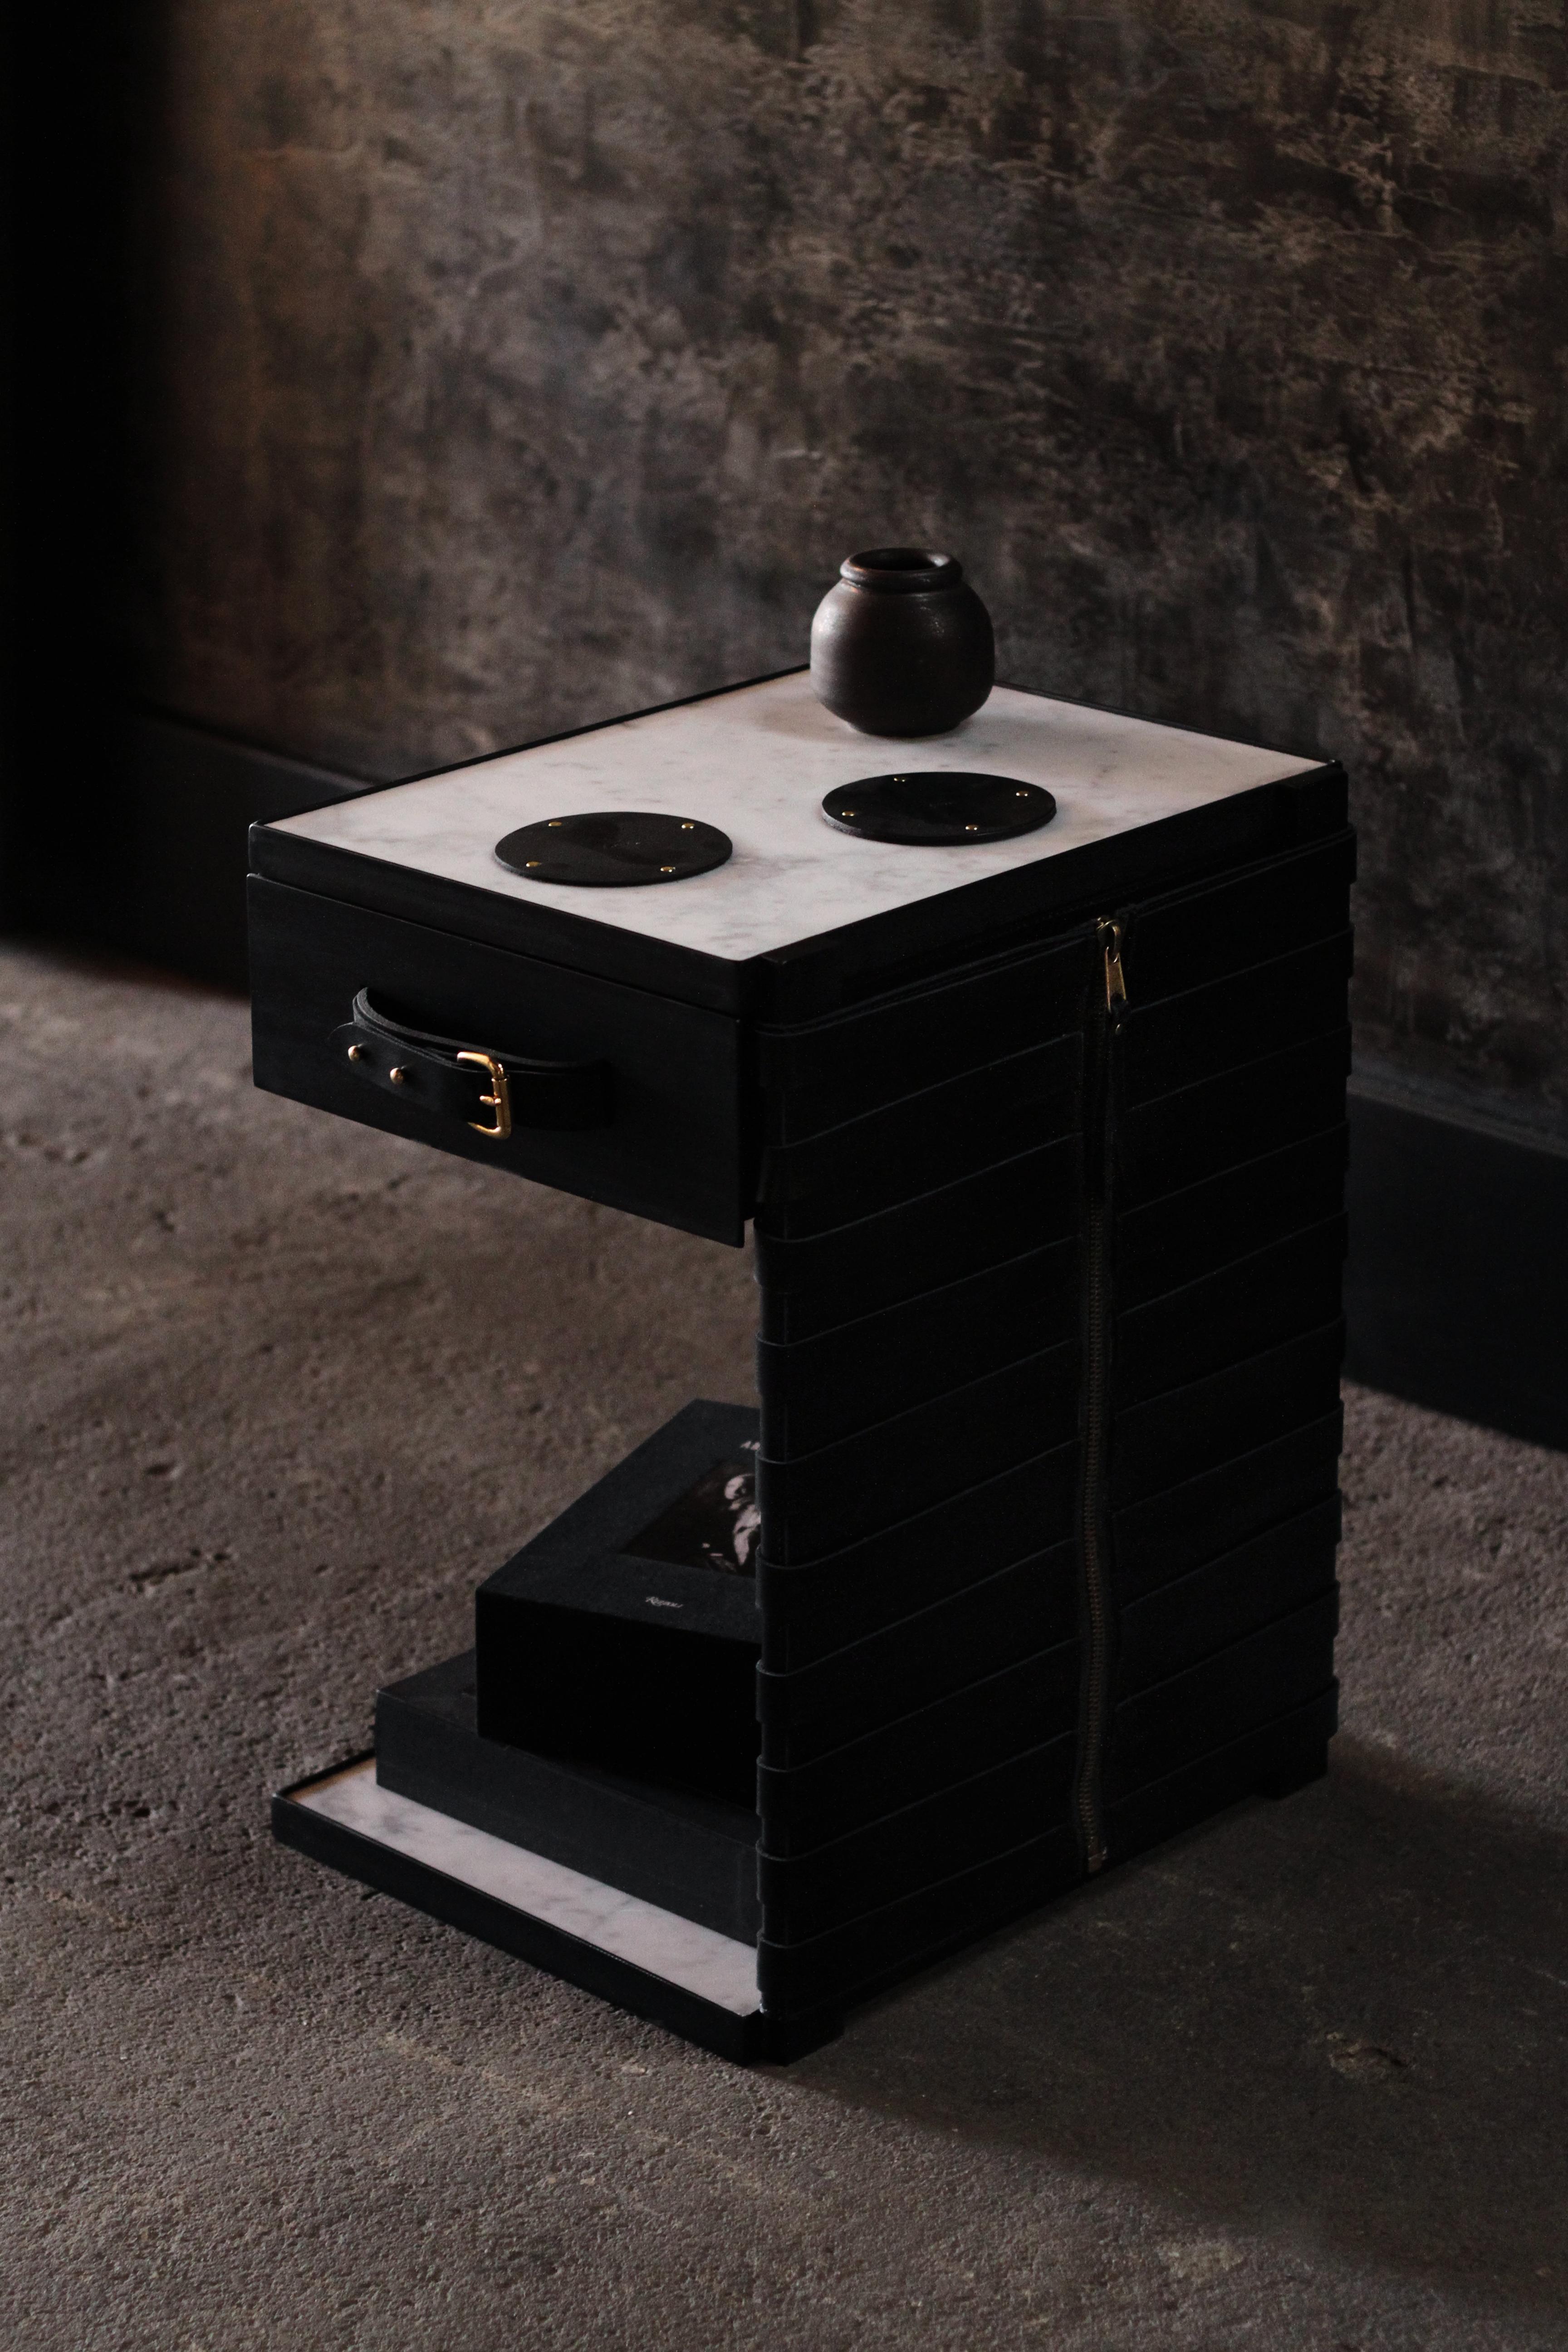 The (wh)ORE HAüS STUDIOS Restraint side table is made of blackened steel, marble, brass accents and leather panels. This table is made to order and can, therefore, be customized. As pictured; Blackened steel, Nero Marquina marble, and black leather